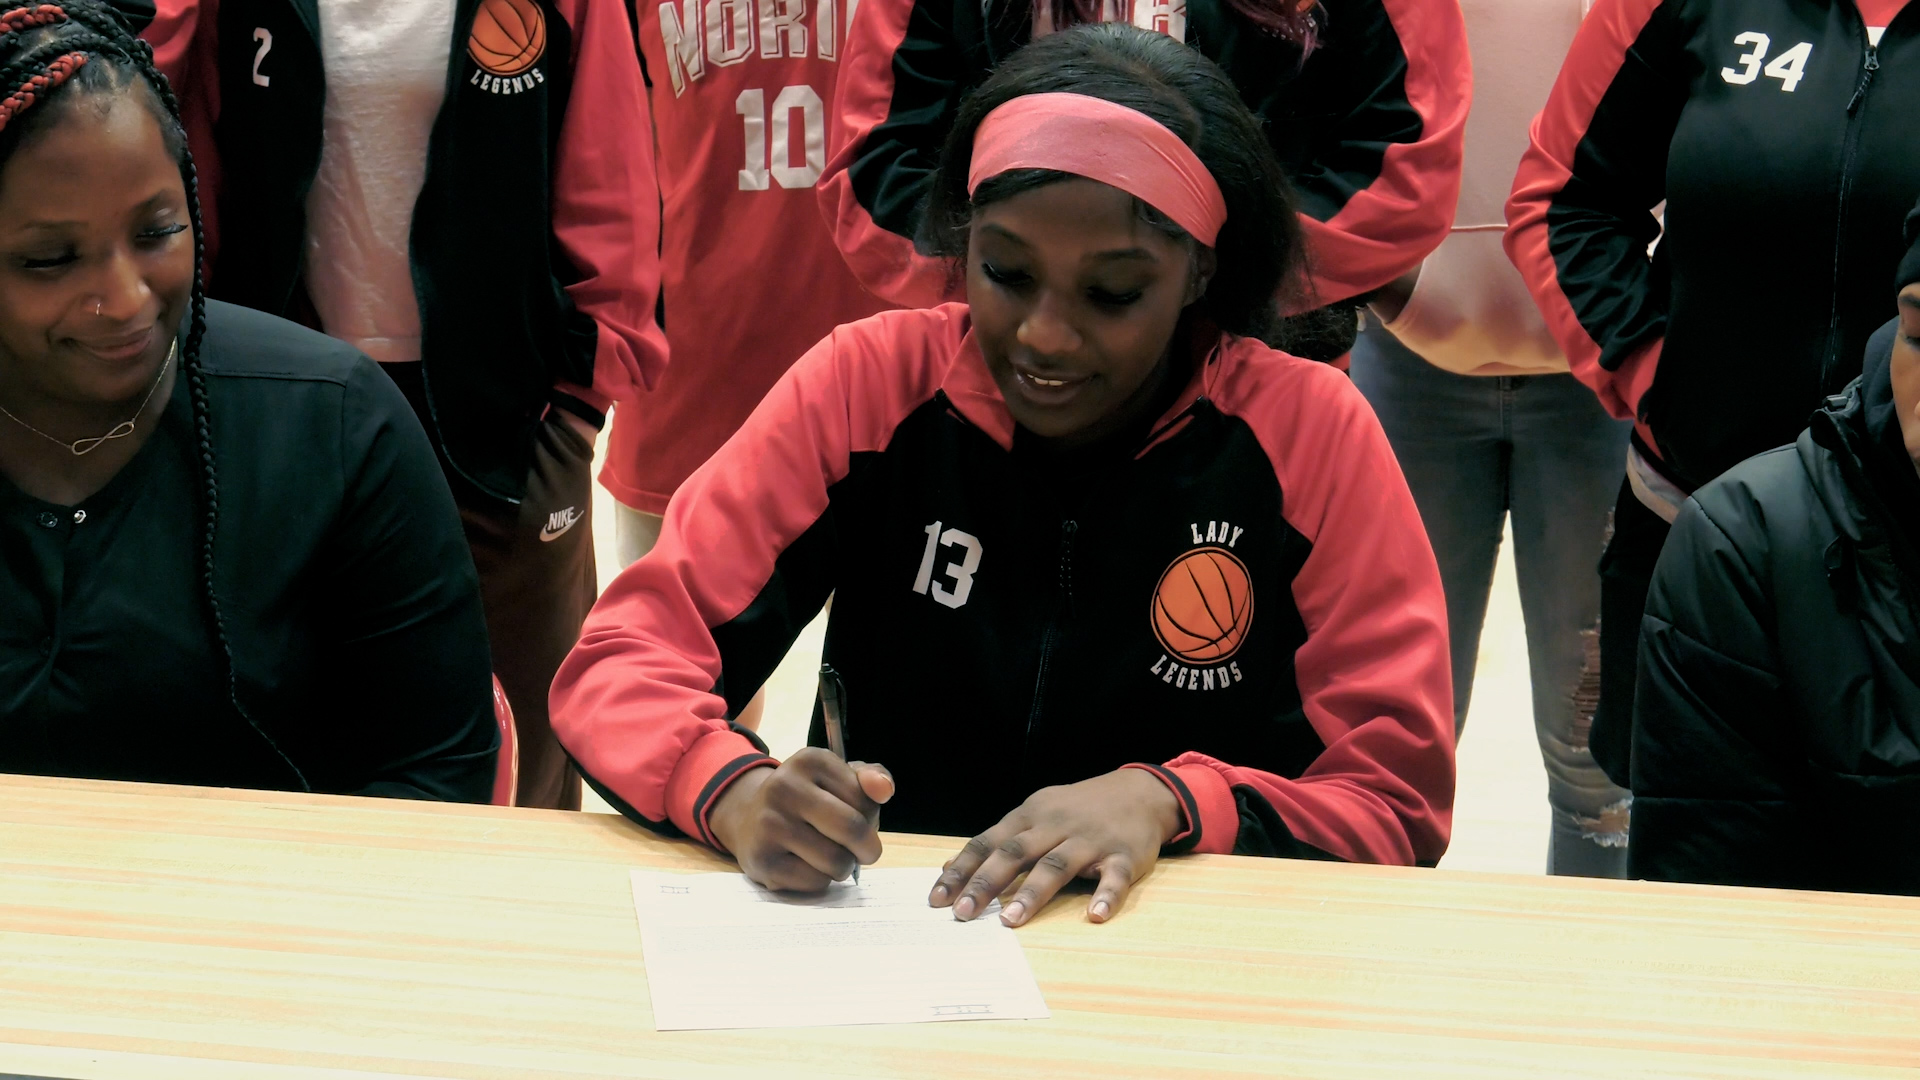 North Side's Aniya Woodson signs with Marian-Ancilla women's hoops